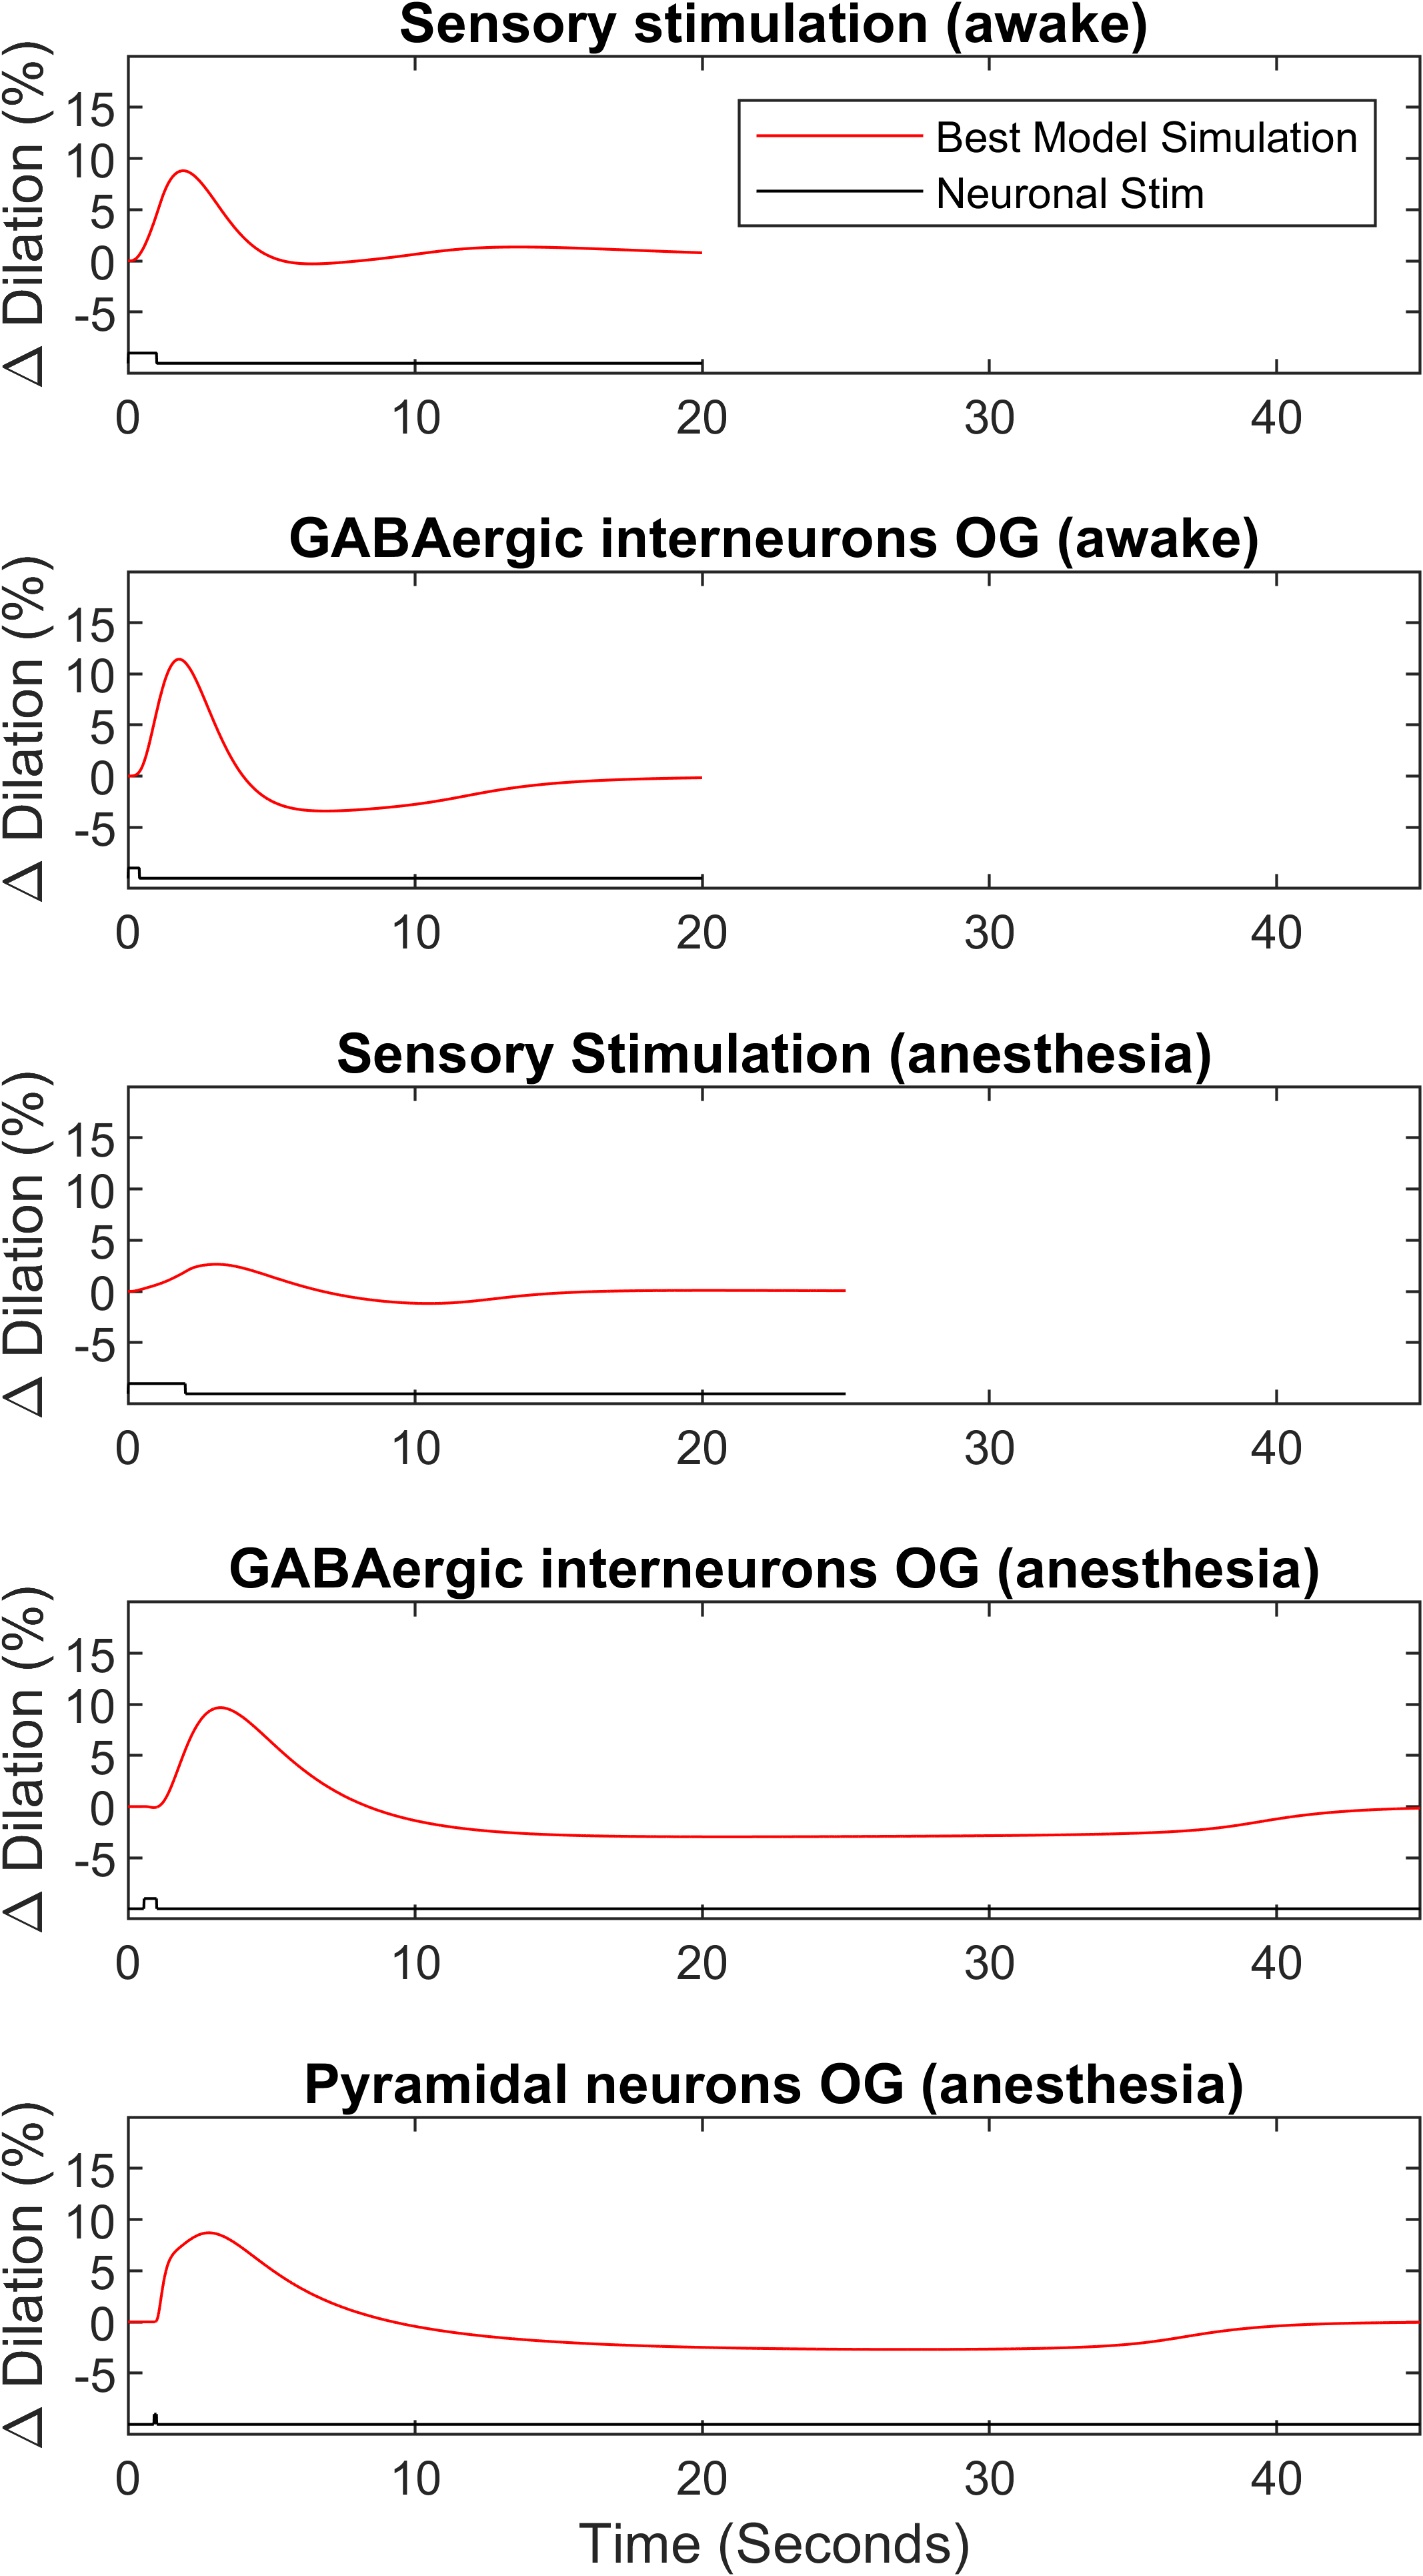 Best estimated model simulation of arteriolar dilation to sensory or optogenetic stimulation in awake and anesthetised mice. This figure matches the subfigures B-D-F-H-J of Figure 3 in the primary publication and can be reproduced using Figure3.m file.